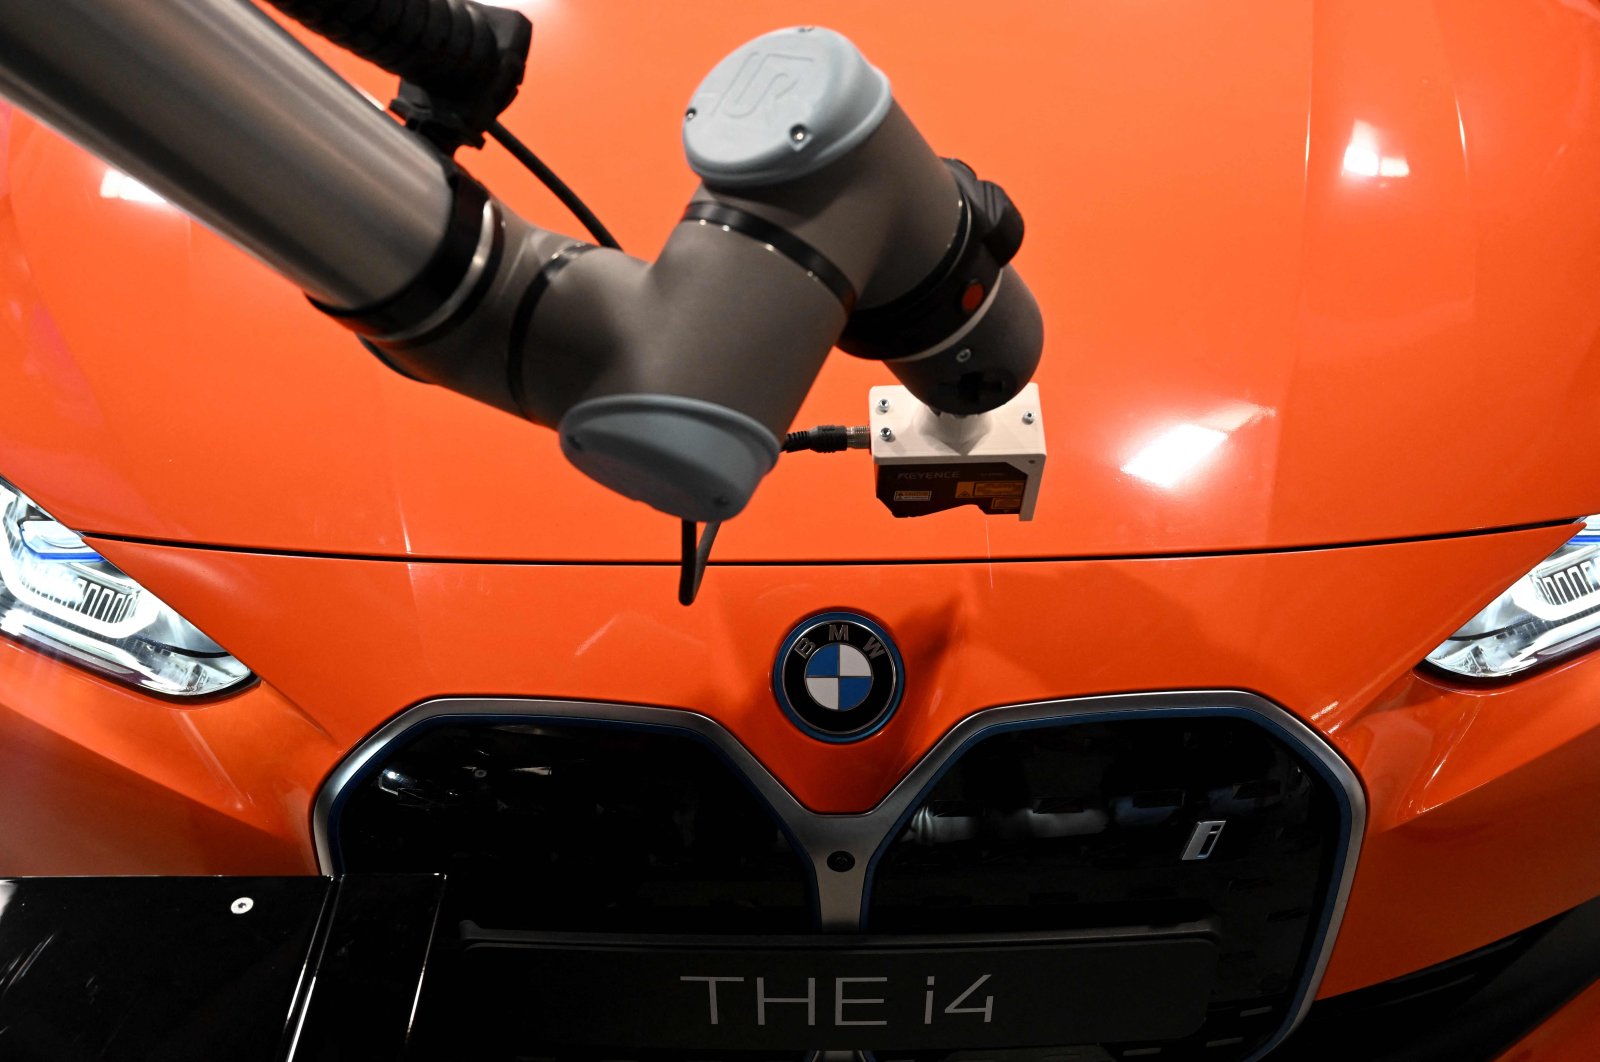 A robot takes over the quality check of a new BMW i4 car presented during an event marking the 100th anniversary of the BMW plant in Munich, southern Germany, May 20, 2022. (AFP Photo)